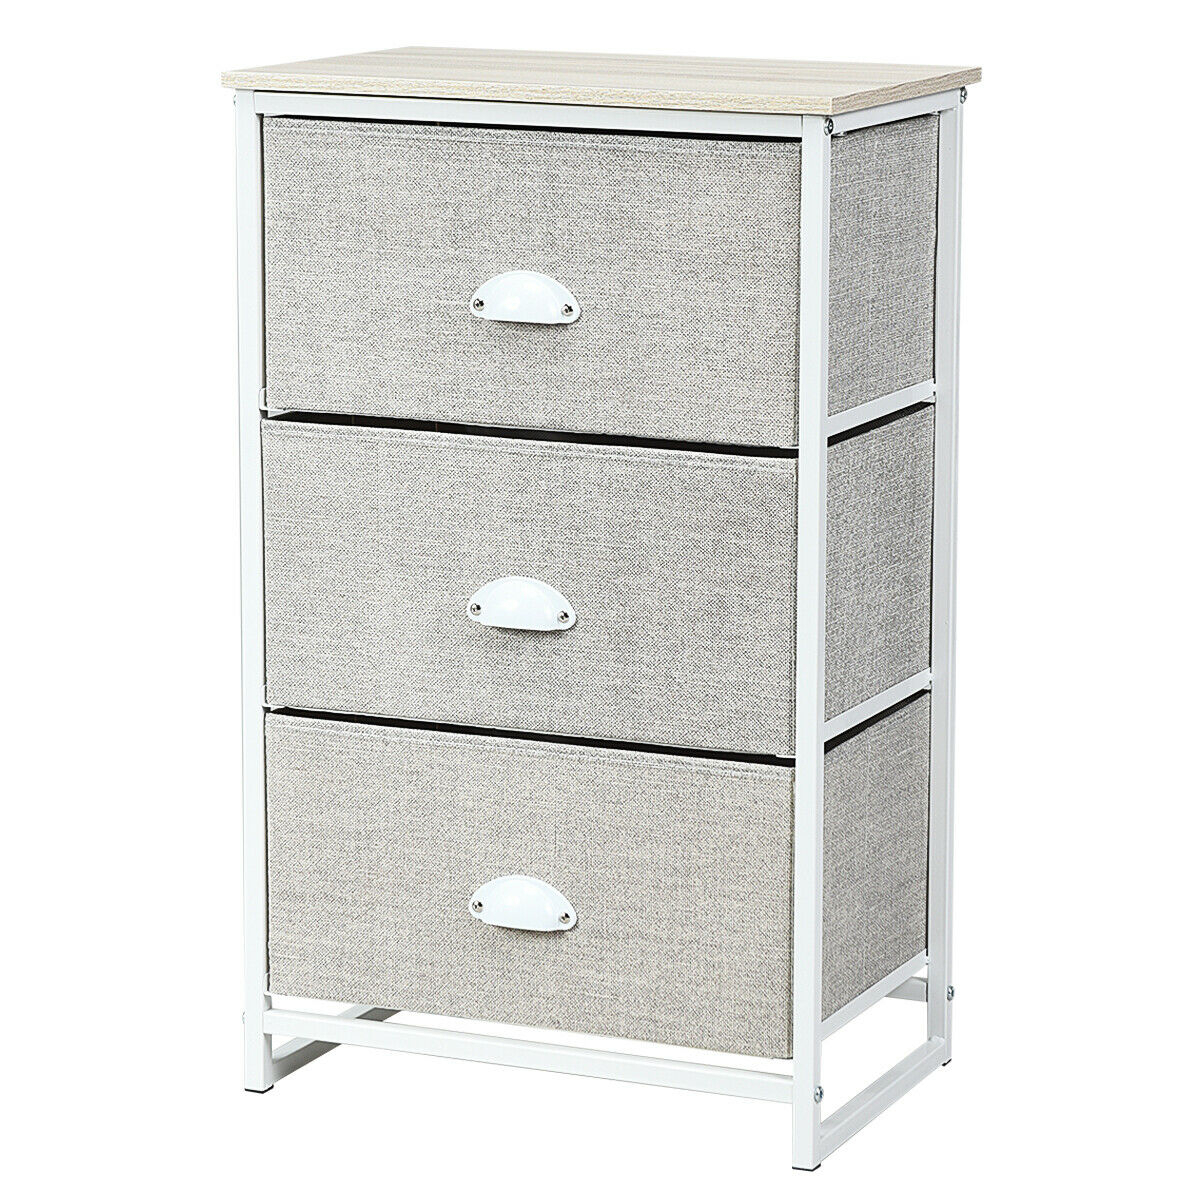 3 Drawer Nightstand Side Table Storage Tower Dresser Chest Home Office Furniture - White